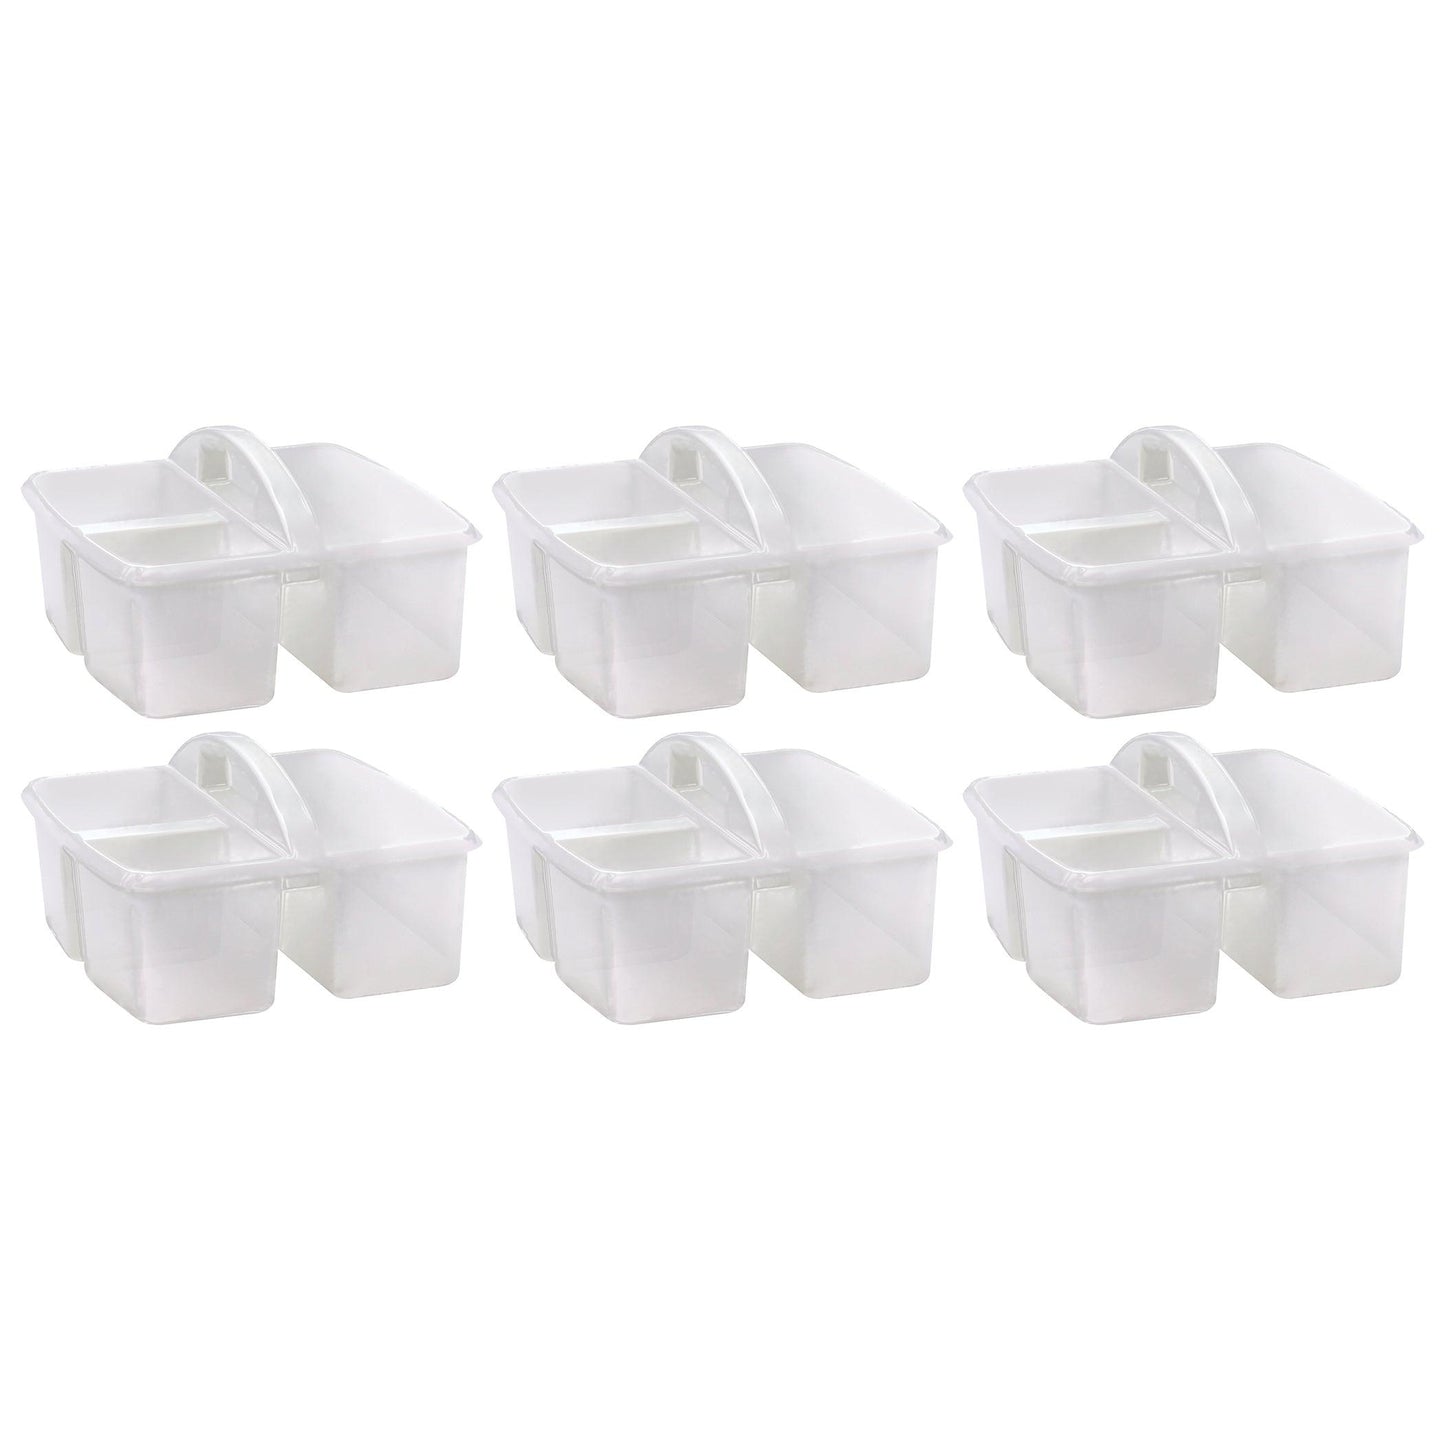 Plastic Storage Caddy, Clear, Pack of 6 - Loomini